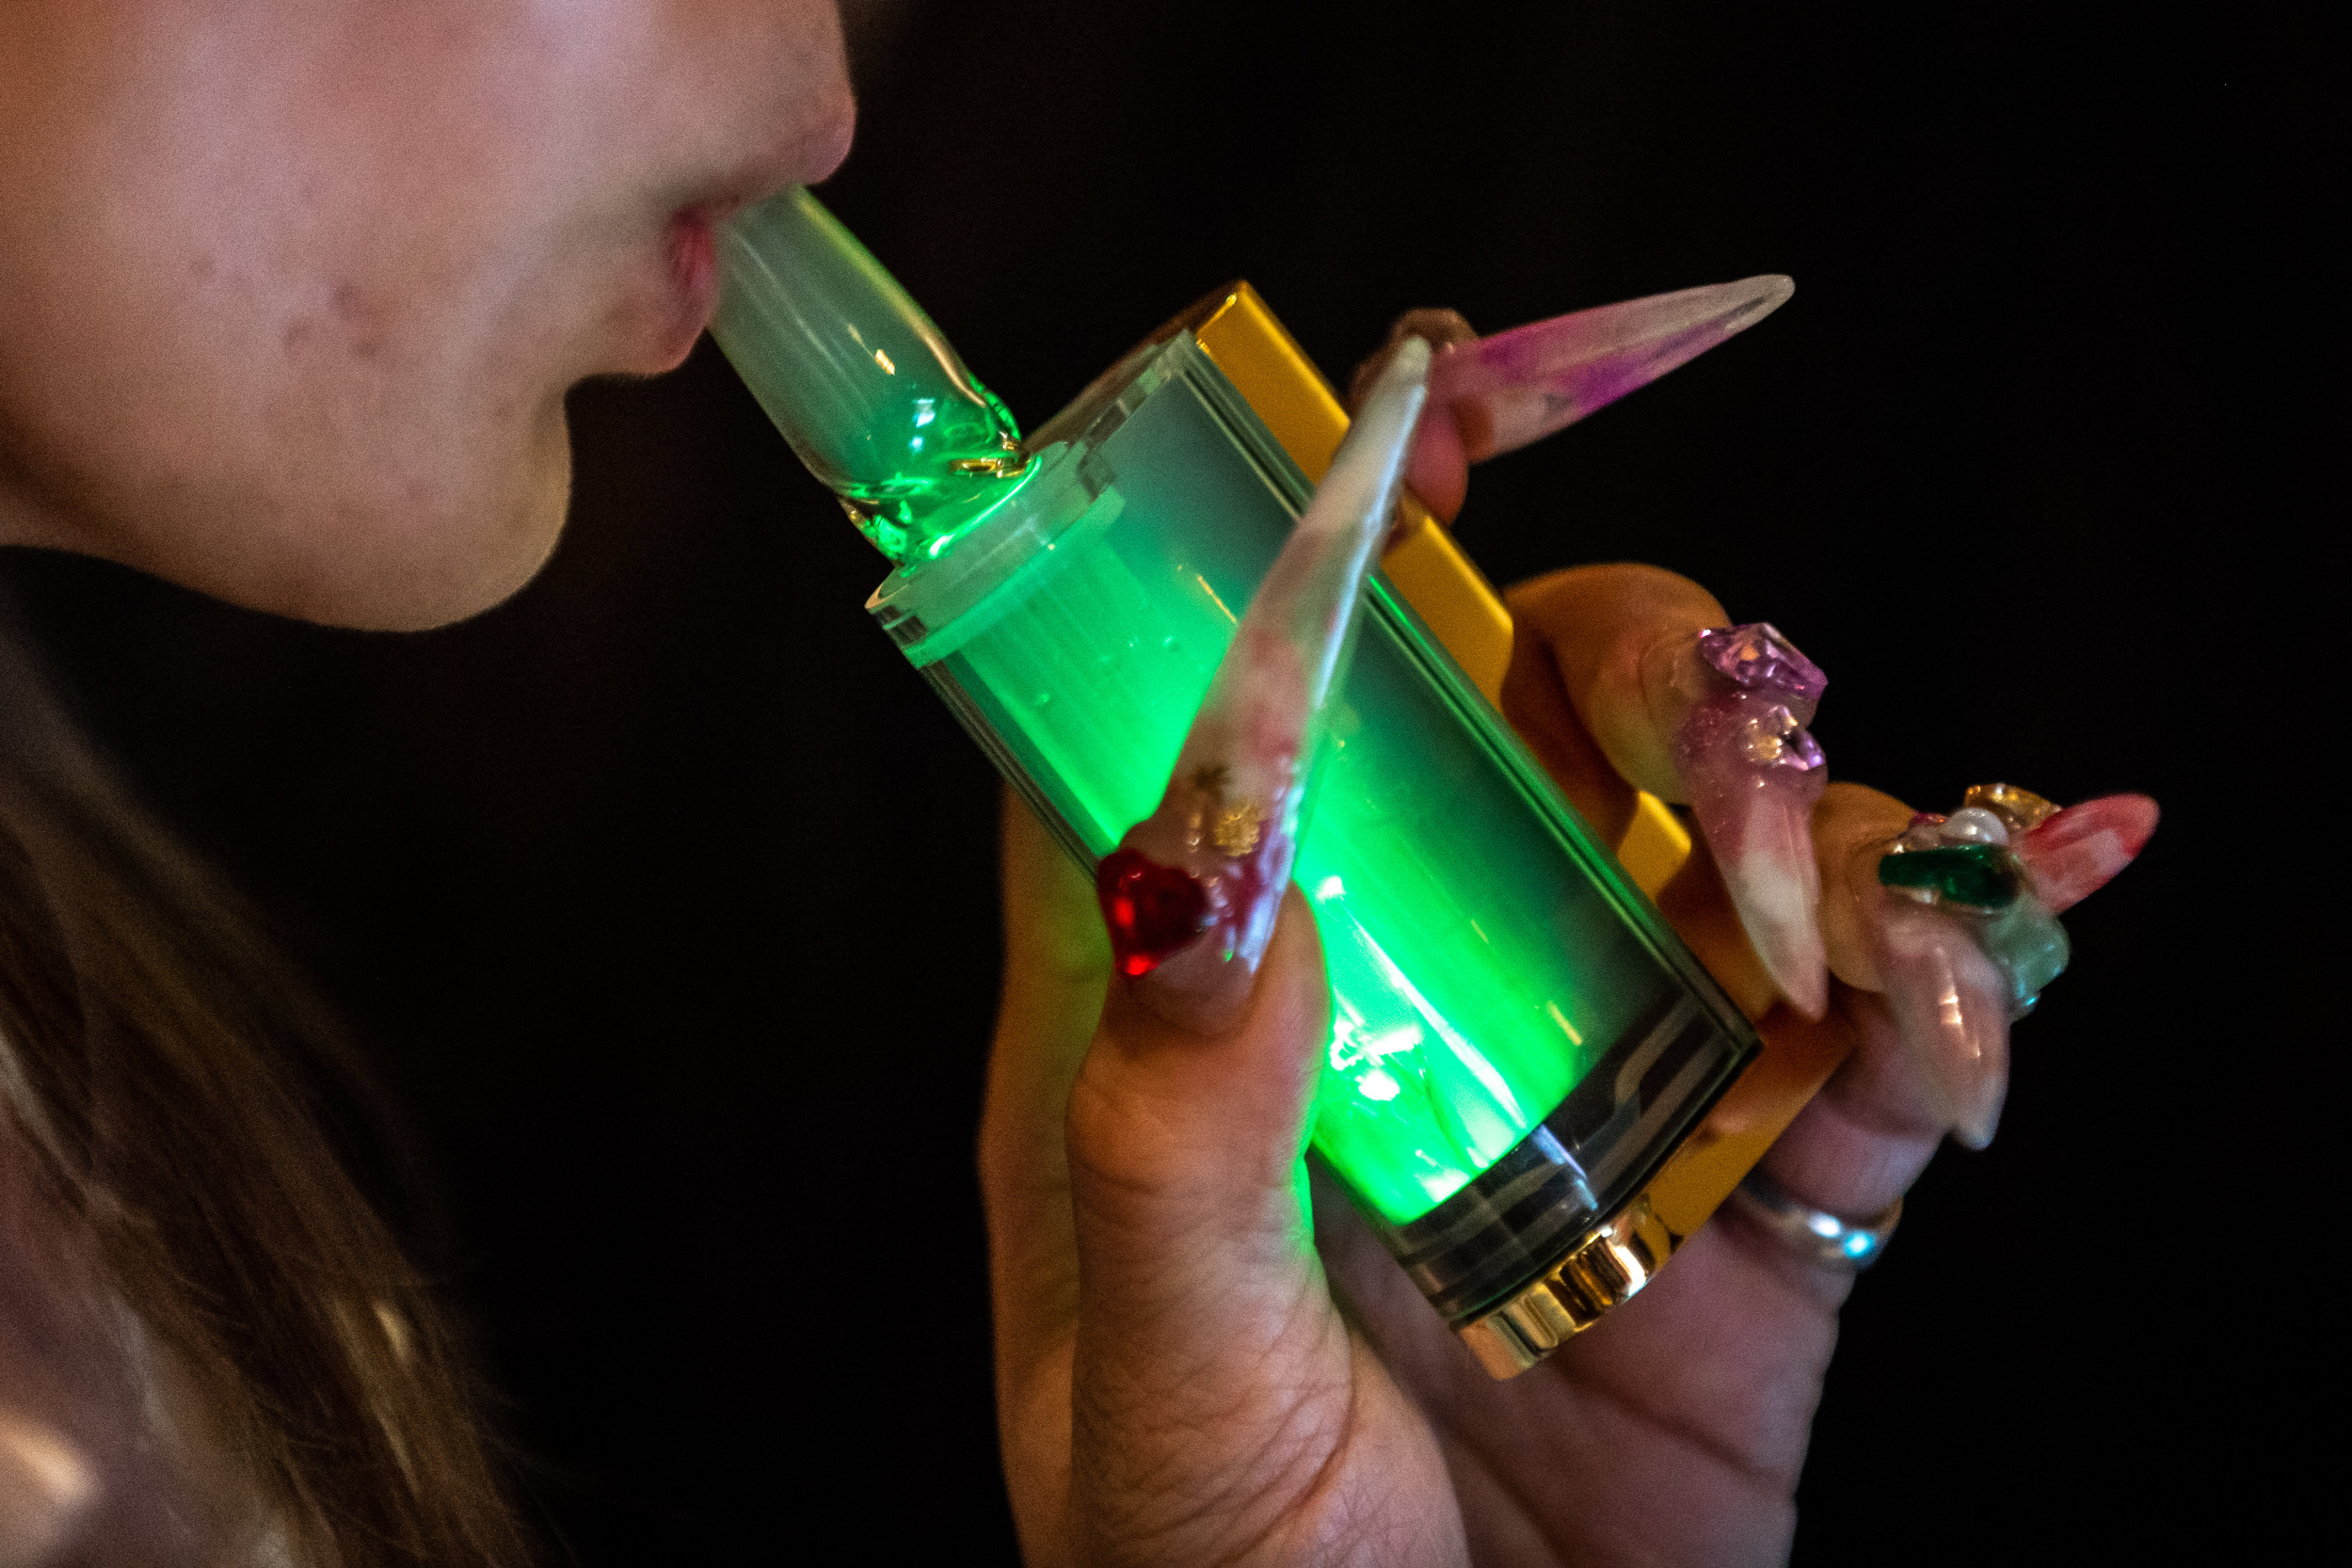 A woman demonstrates using a CBD vape at last year’s “Cannabis Open” in Tokyo. CBD is legal in Japan if extracted from the plant’s seeds or fully-grown stems, but not other parts like the leaves. Psychoactive THC is banned. Photo: AFP